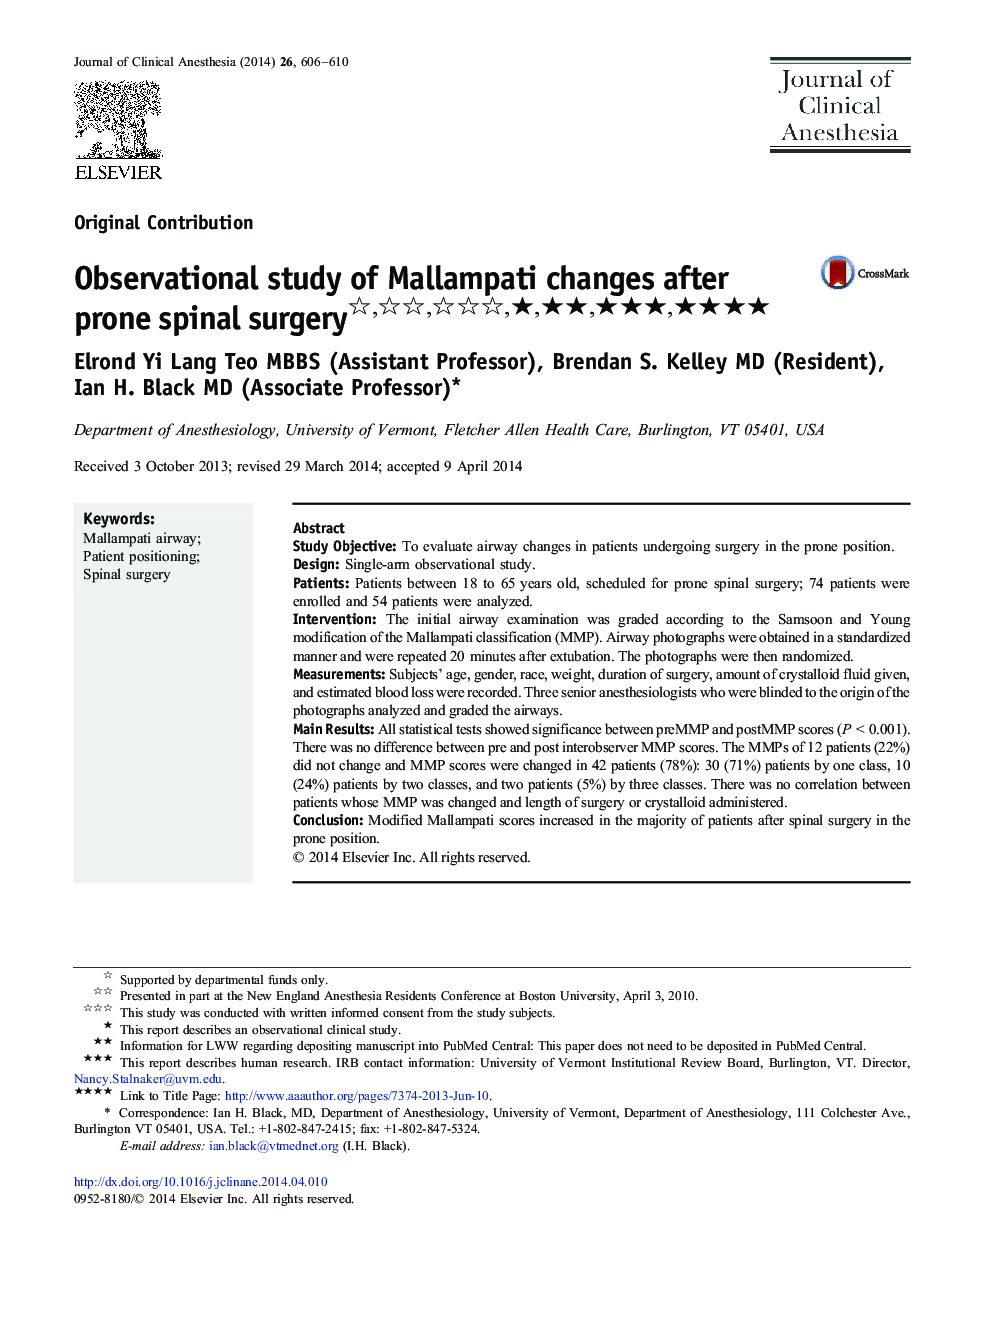 Observational study of Mallampati changes after prone spinal surgery ★★★★★★★★★★